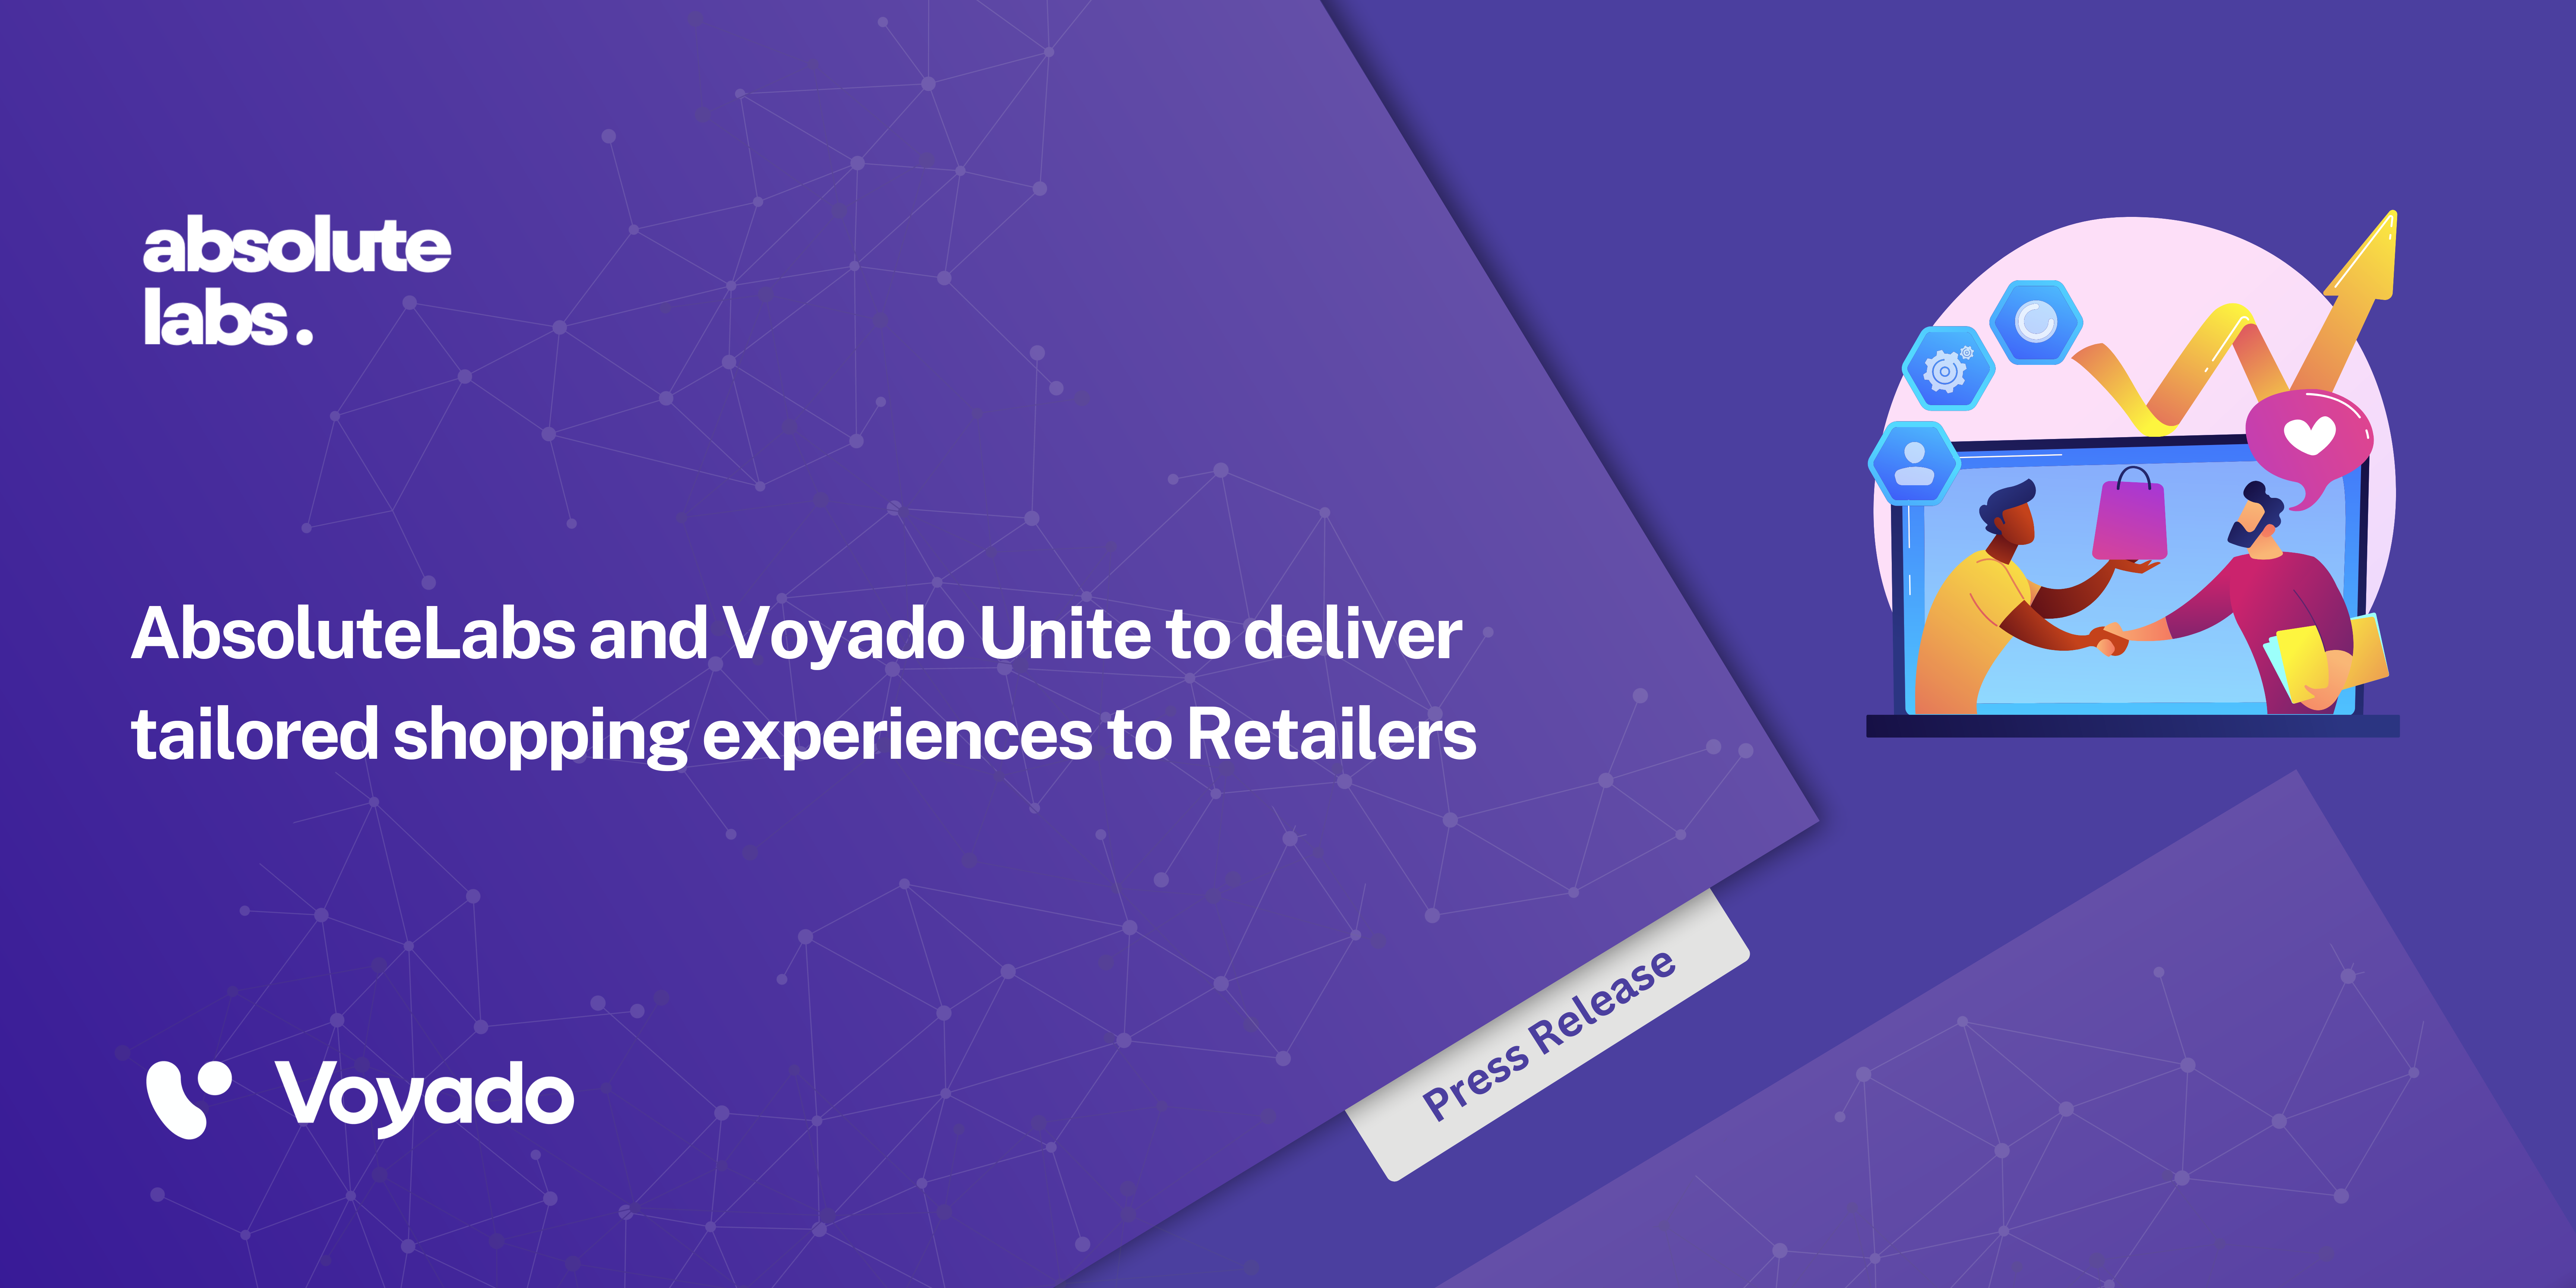 AbsoluteLabs and Voyado Unite to deliver tailored shopping experiences to Retailers